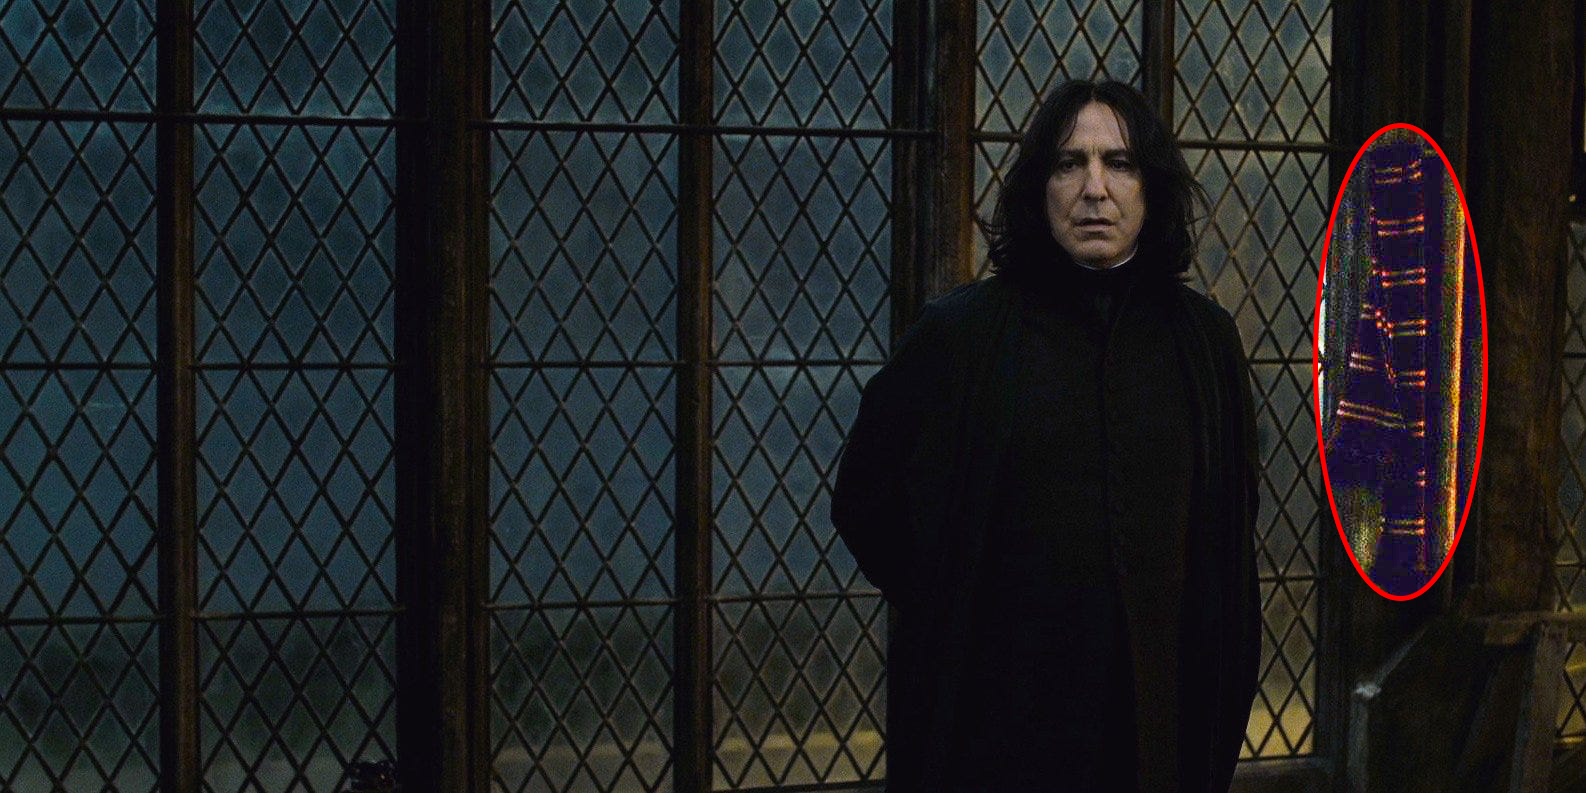 Snape next to a red and gold scarf